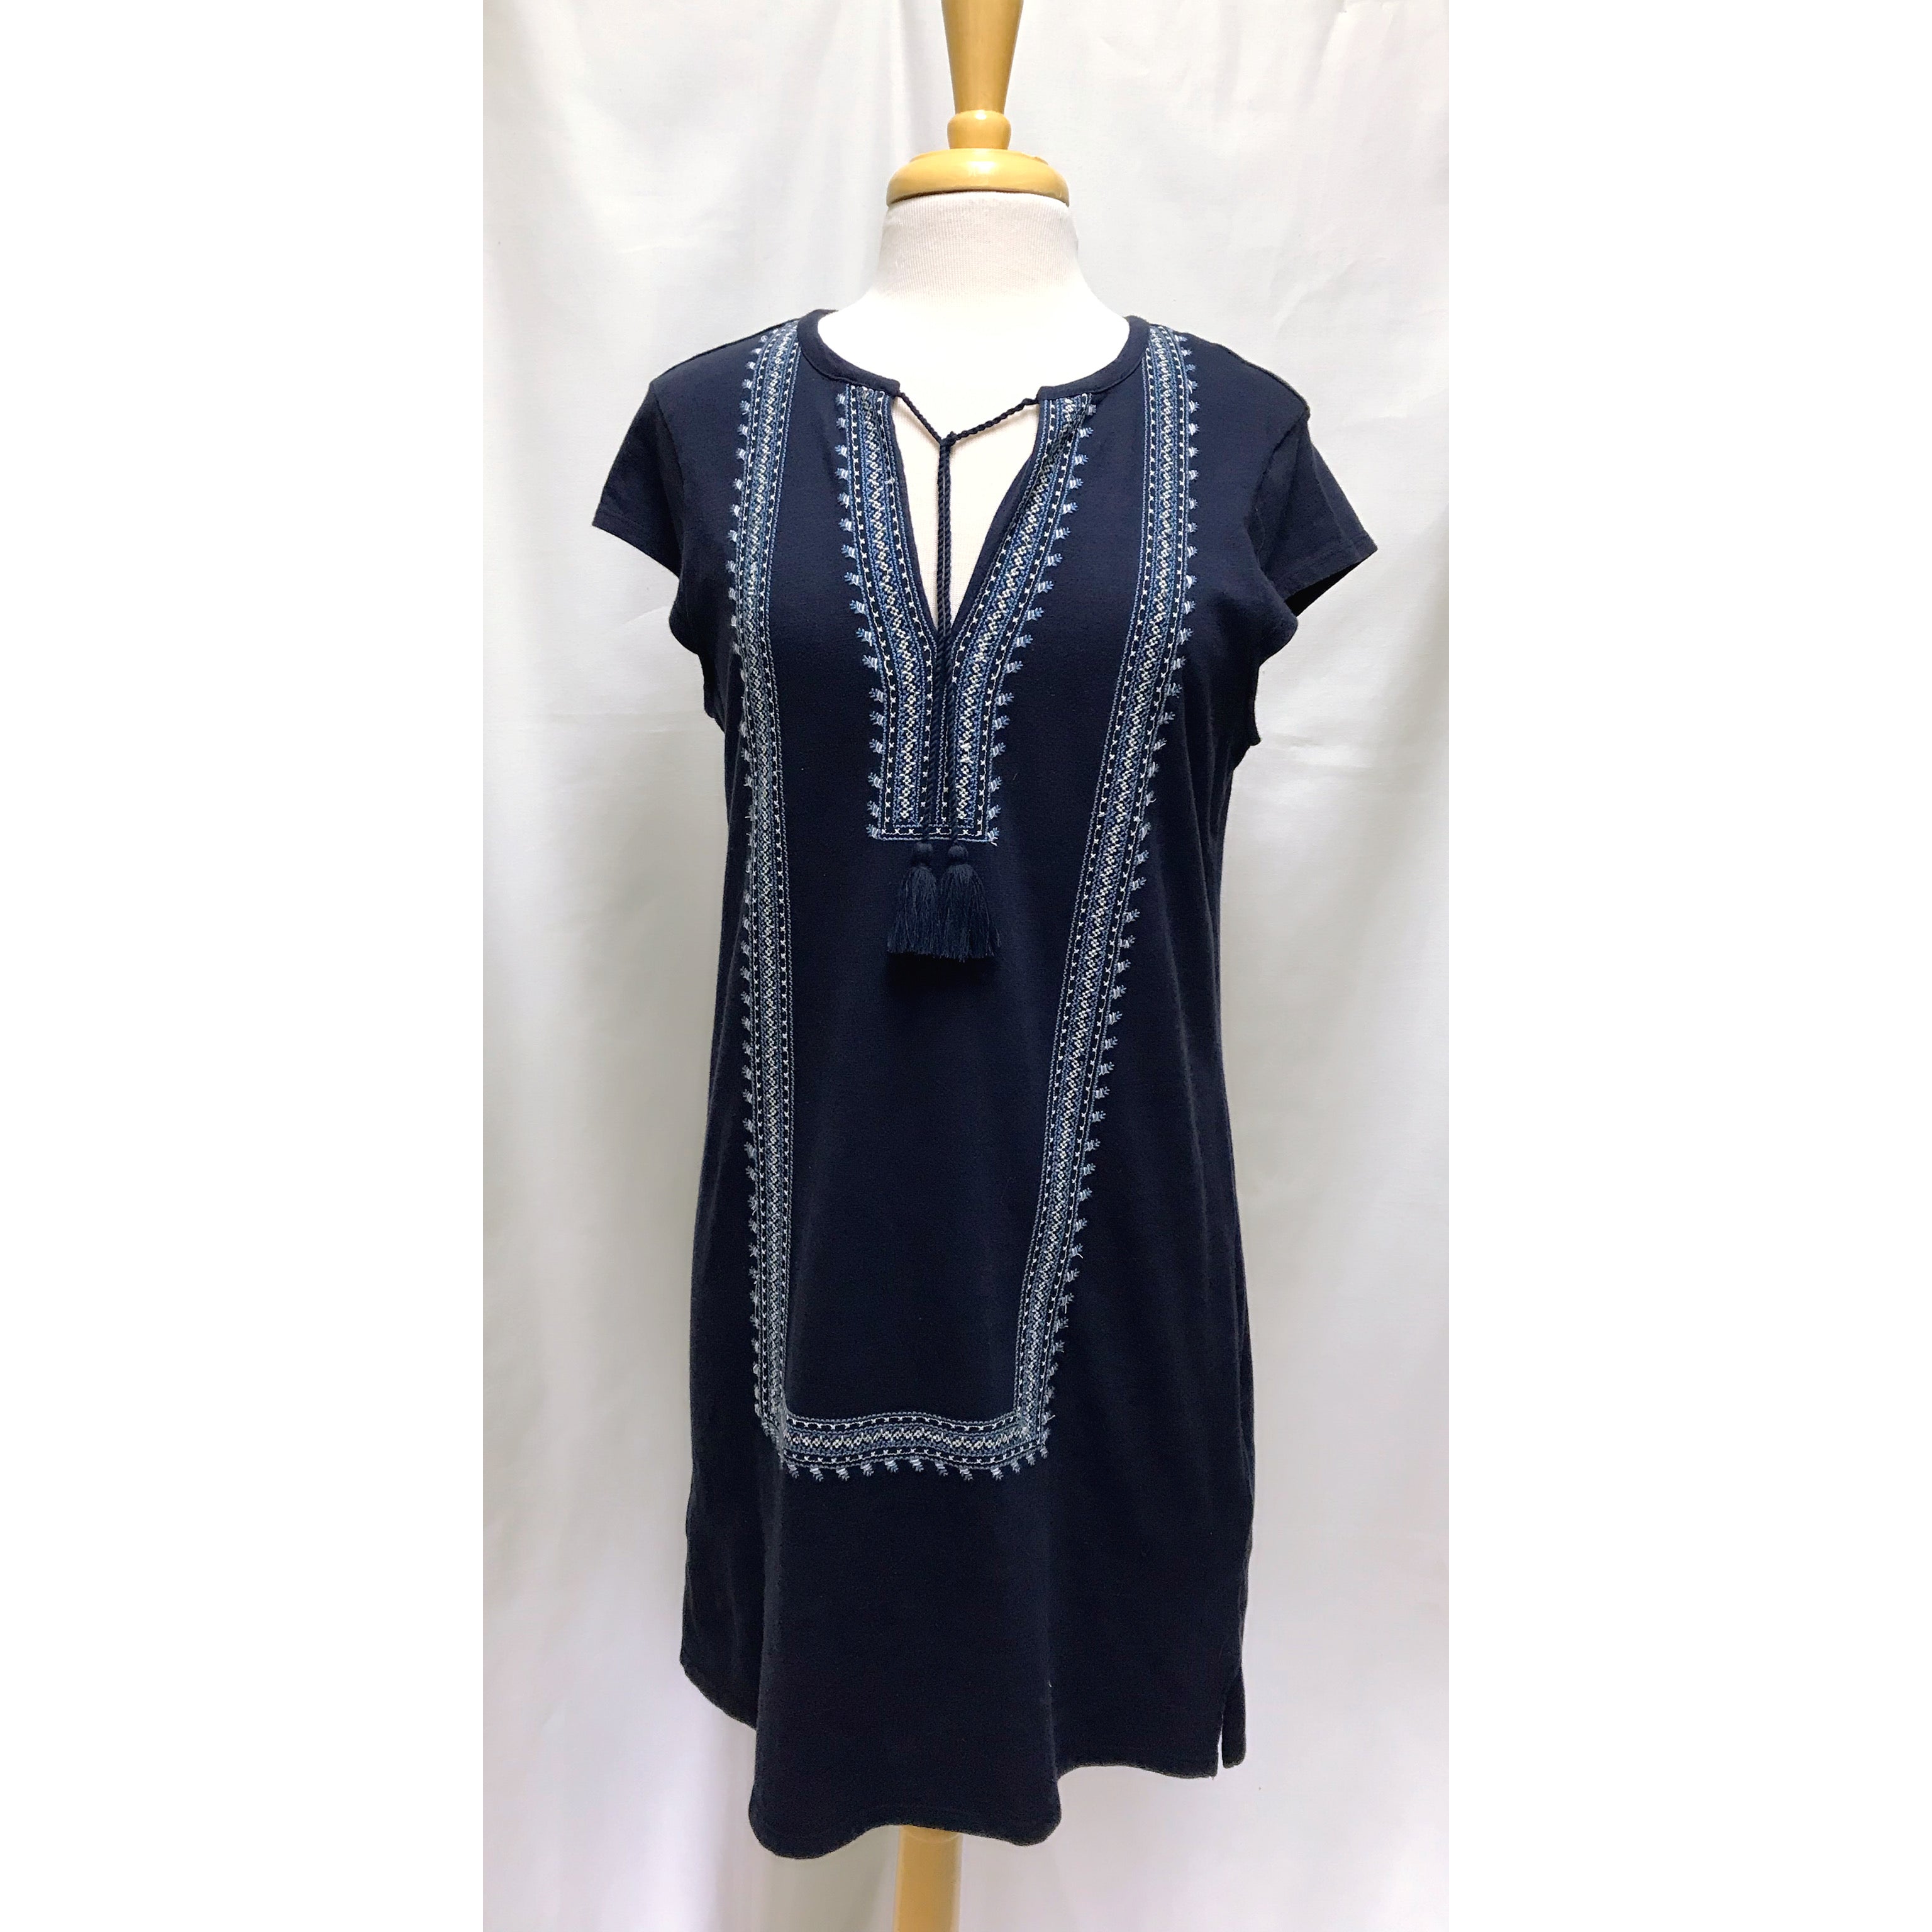 Soft Joie navy embroidered dress, size M, NEW WITH TAGS!